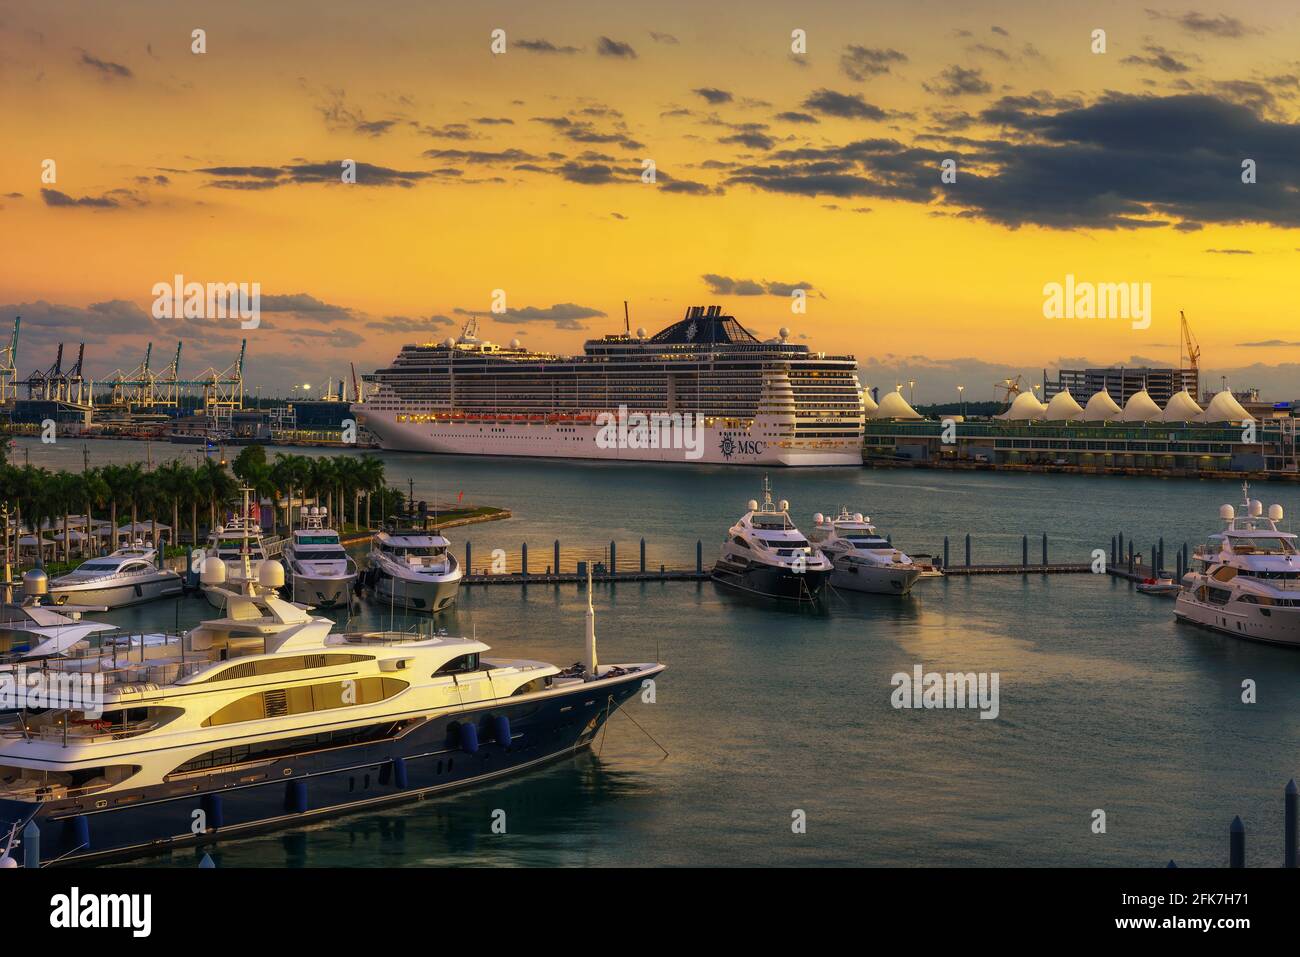 Luxury MSC Divina cruise ship in the Port of Miami at sunset Stock Photo